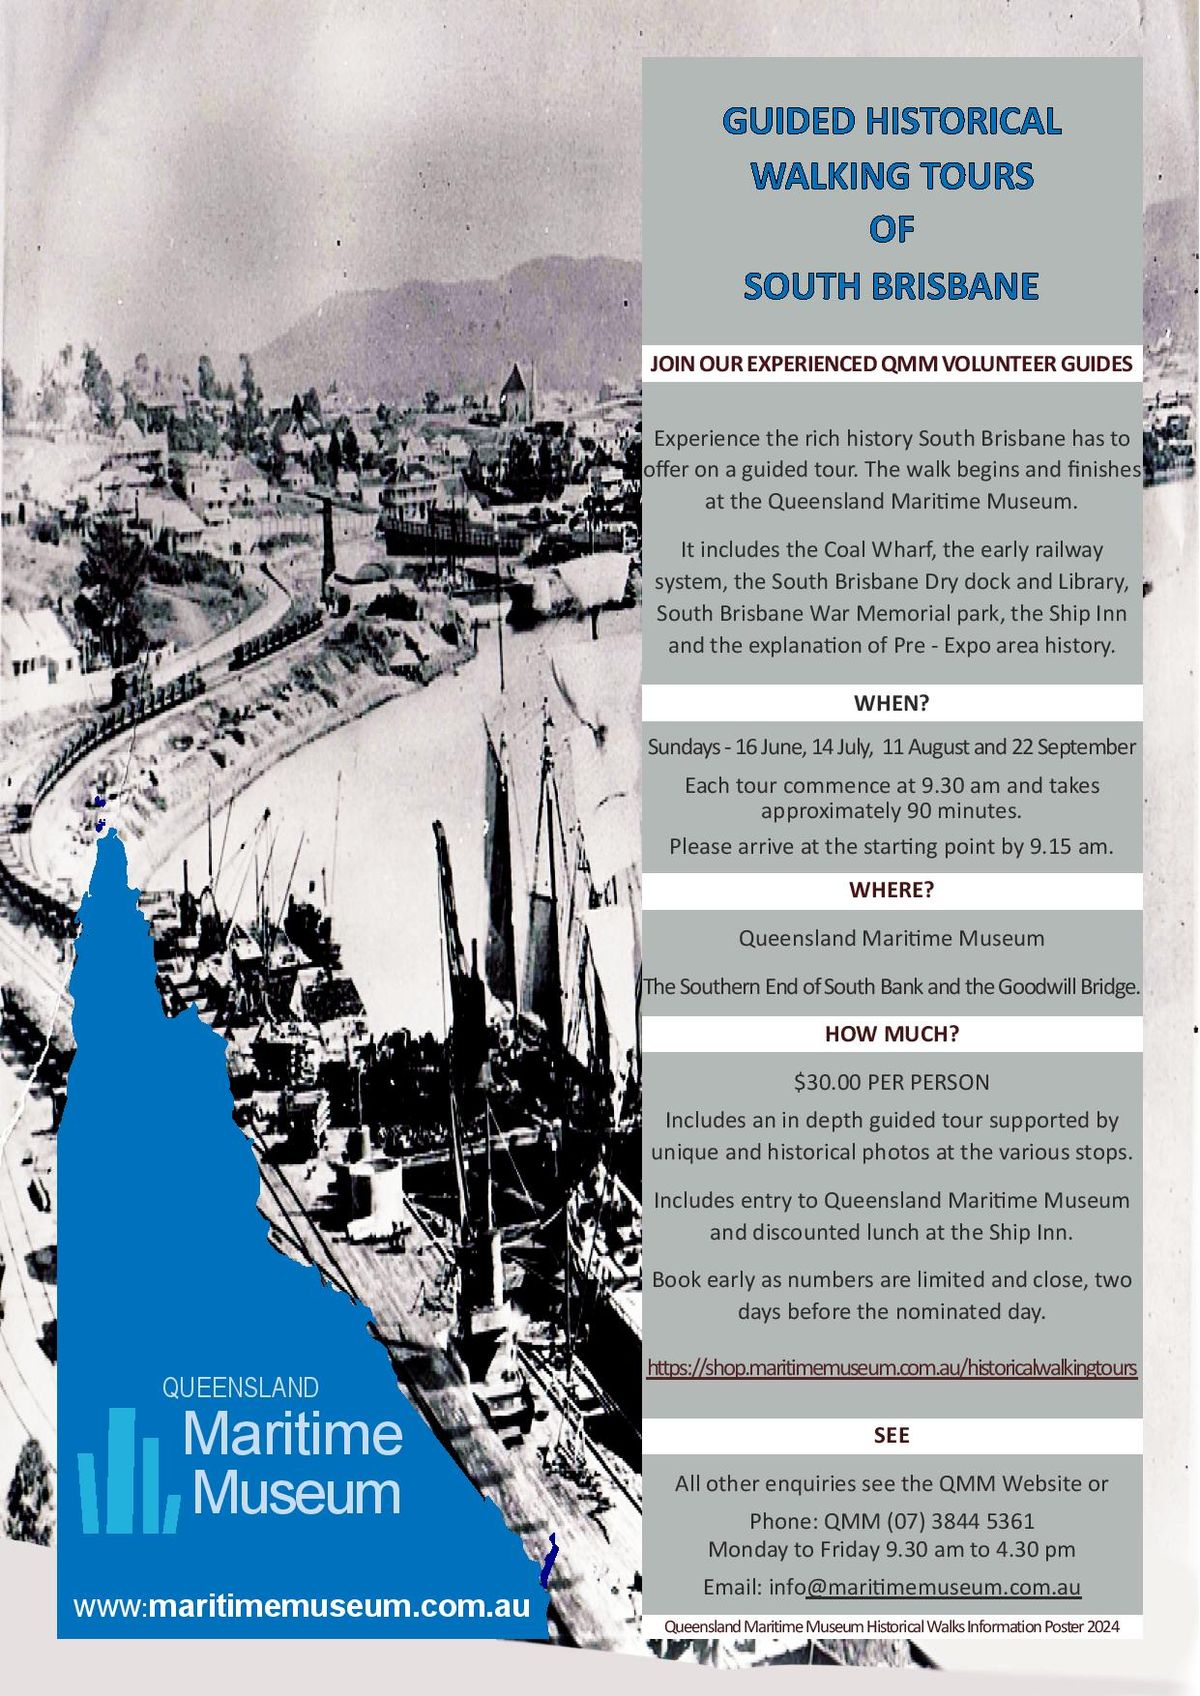 Guided Historical Walking Tours of South Brisbane